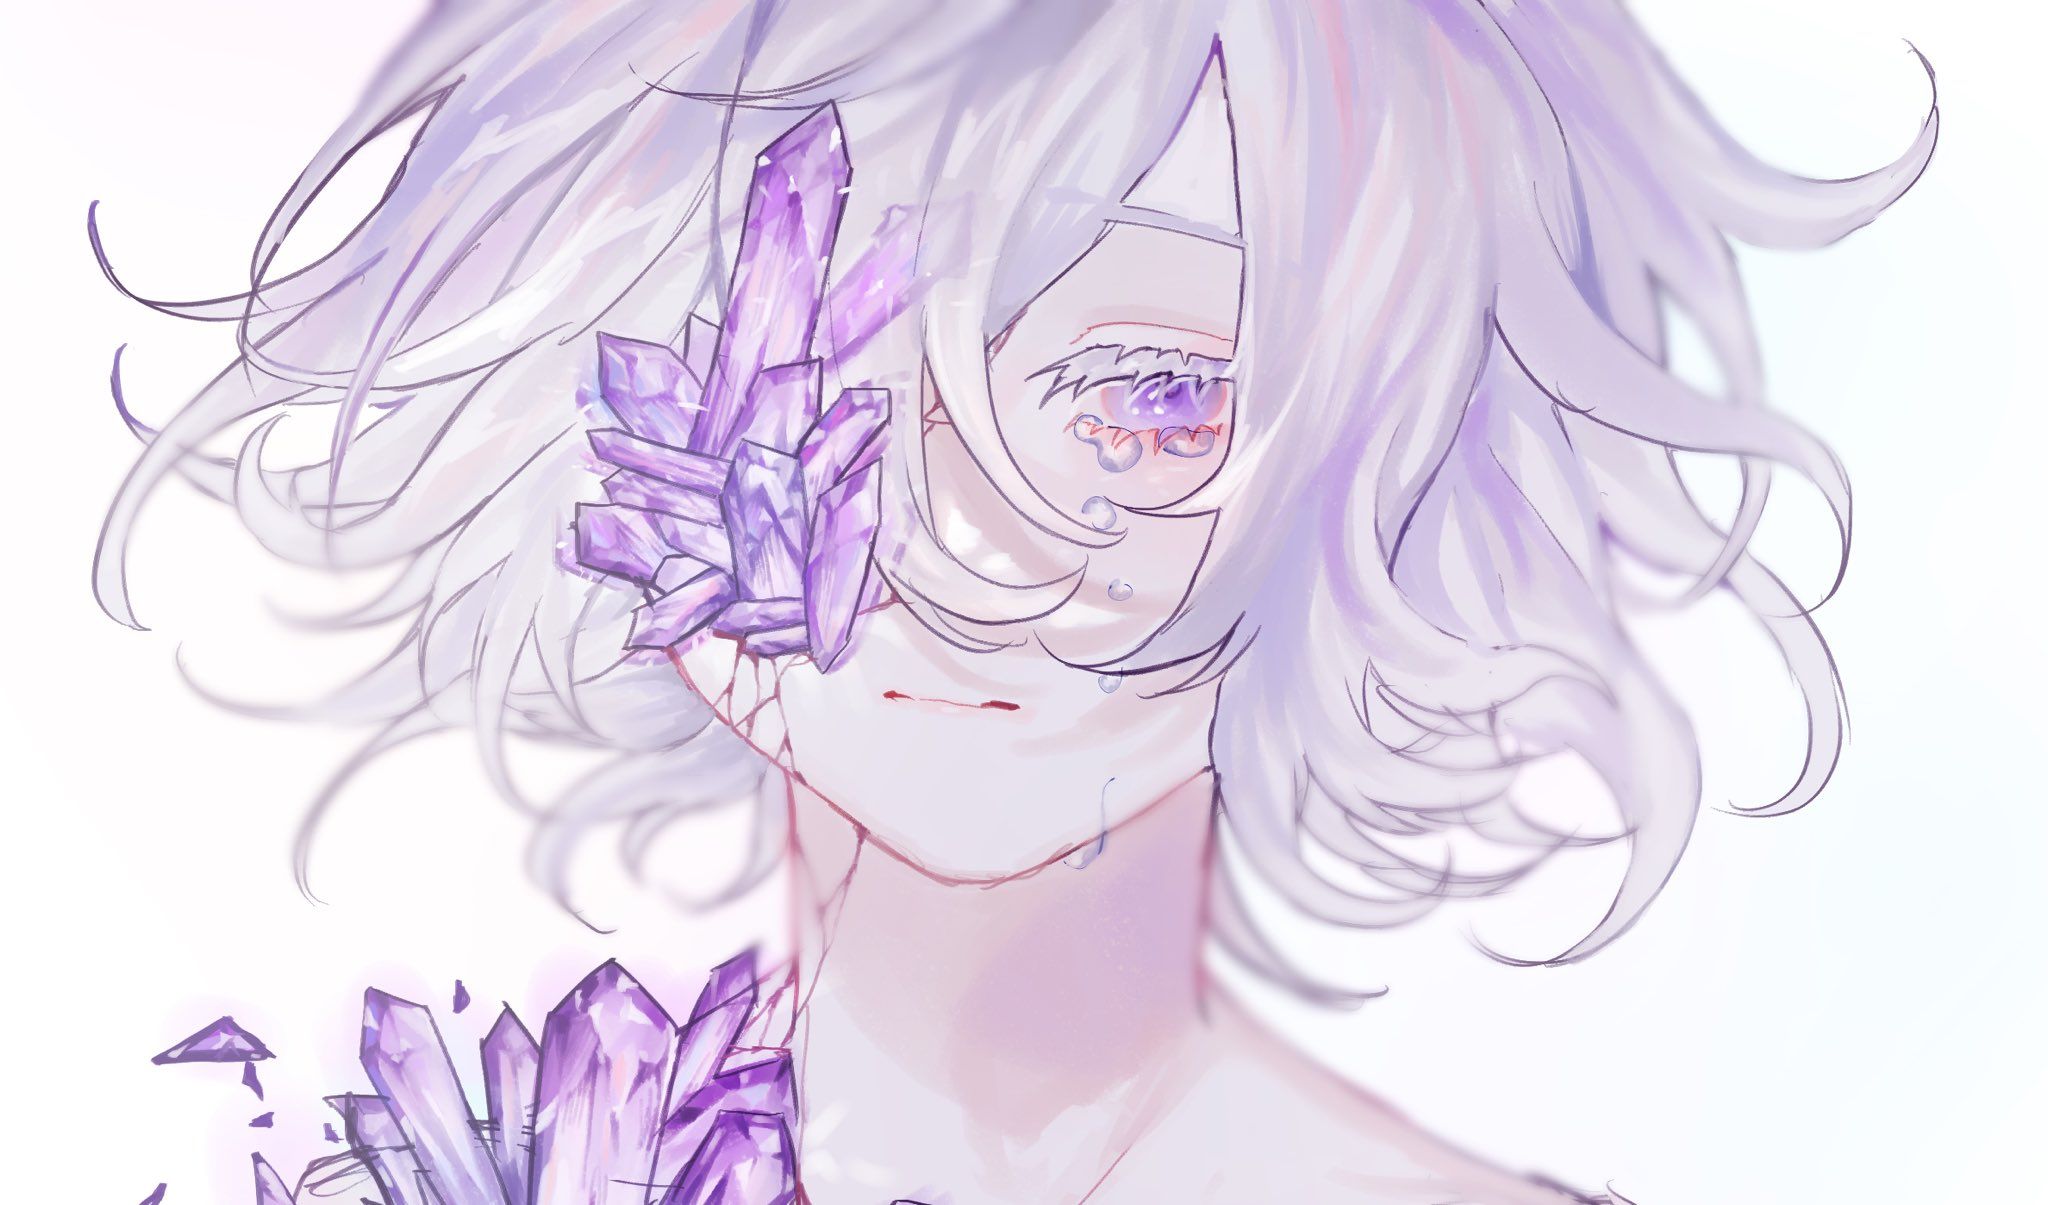 Anime girl with white hair and purple eyes holding purple crystals to her face - Eyes